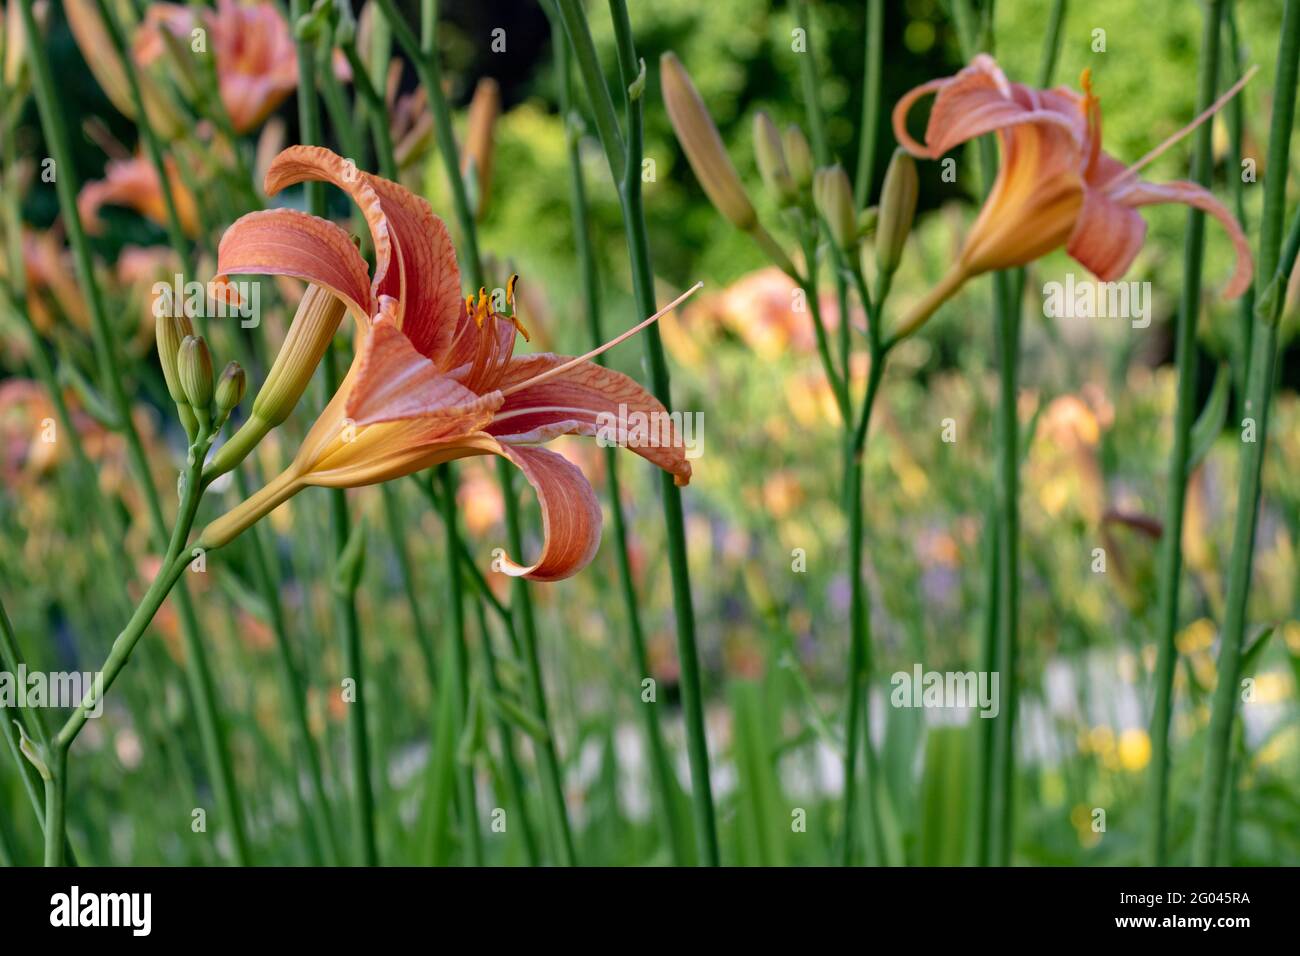 Orange tiger daylily (Hemerocallis fulva) also called day-lily , closeup and side view with green background Stock Photo